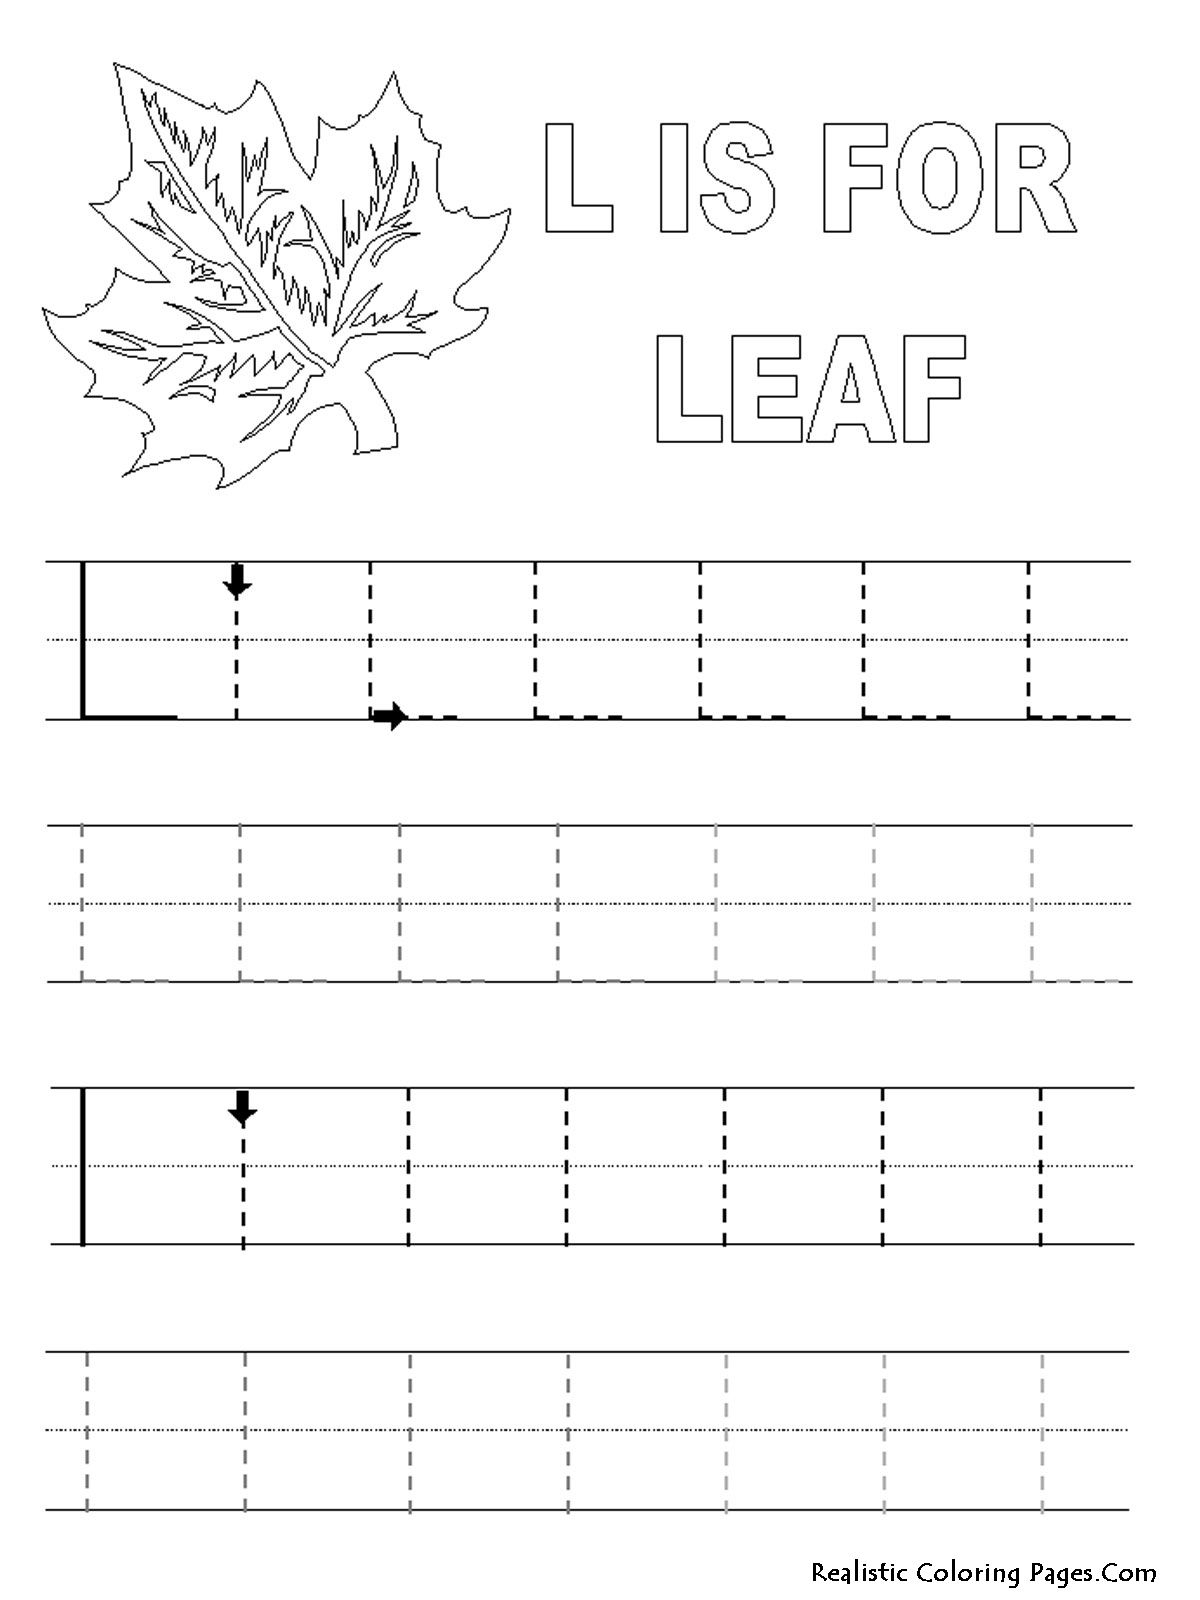 Alphabet Tracer Pages L Leaf | Tracing Sheets, Preschool within Letter L Tracing Page